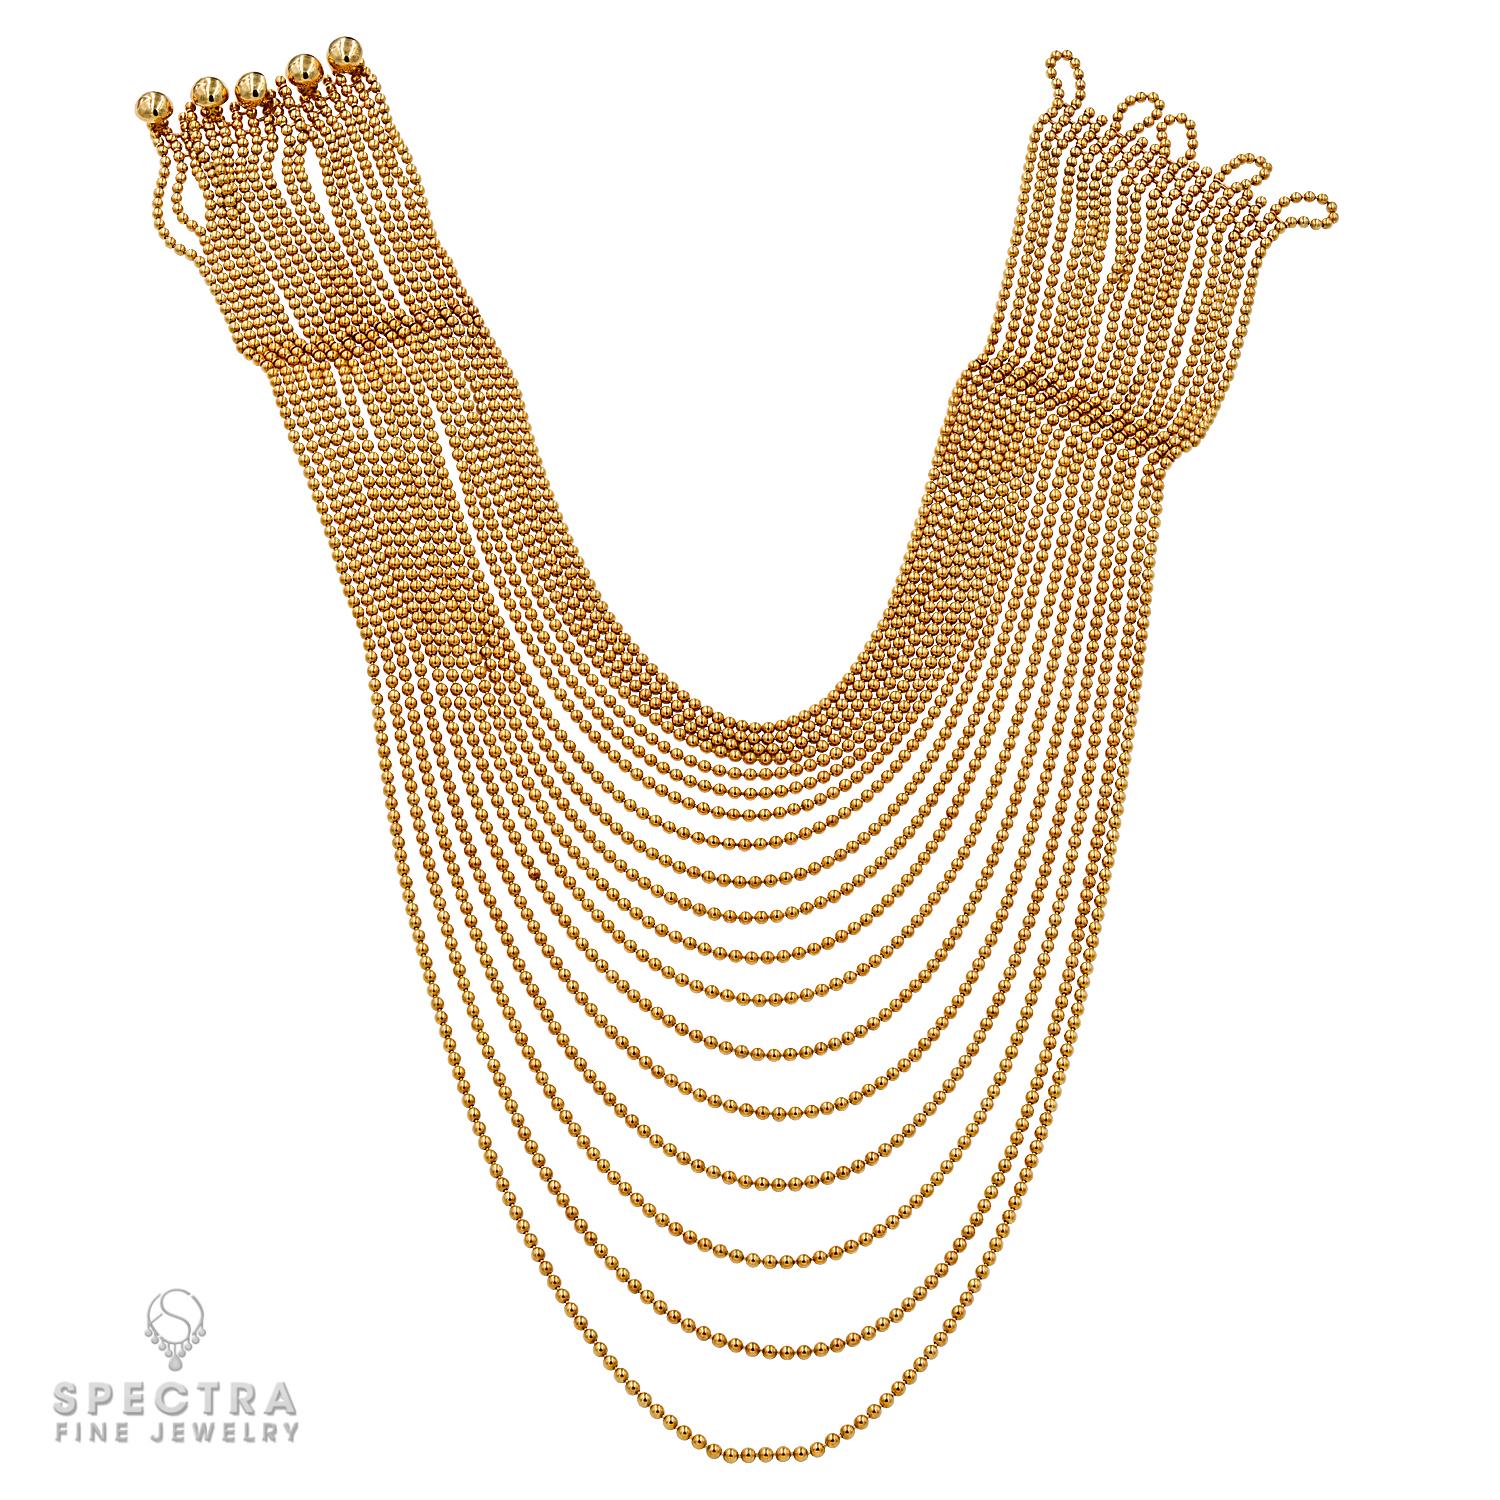 This Cartier multi-strand gold necklace is as versatile as it is stunning. With nearly 20 strands delicately cascading over your décolletage, it's the epitome of elegance. Plus, it features a unique button closure clasp made of five golden buttons,